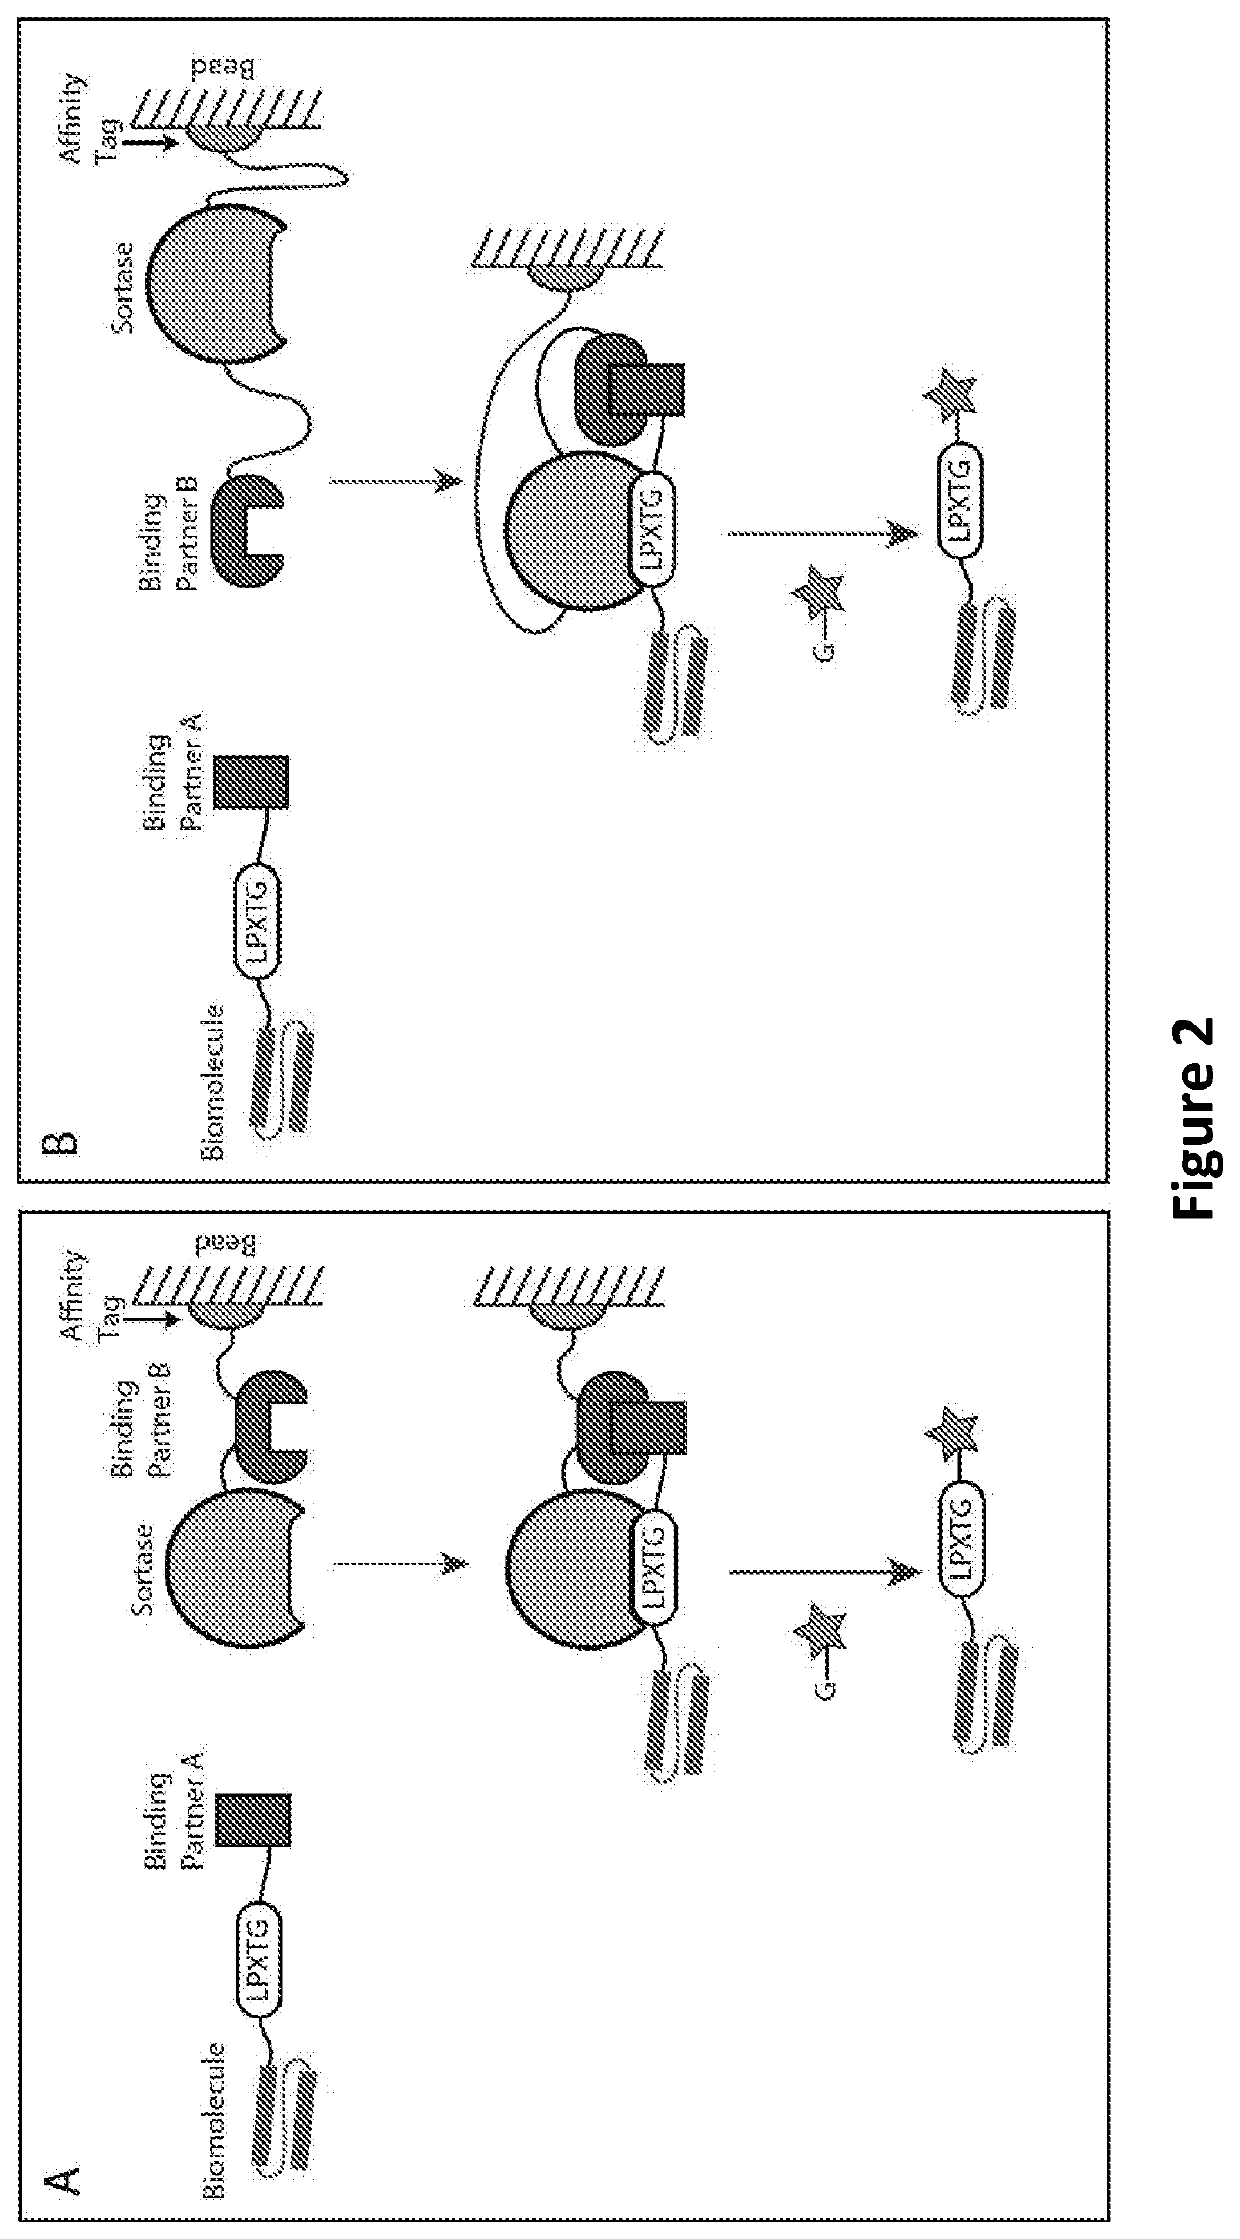 Proximity-based sortase-mediated protein purification and ligation